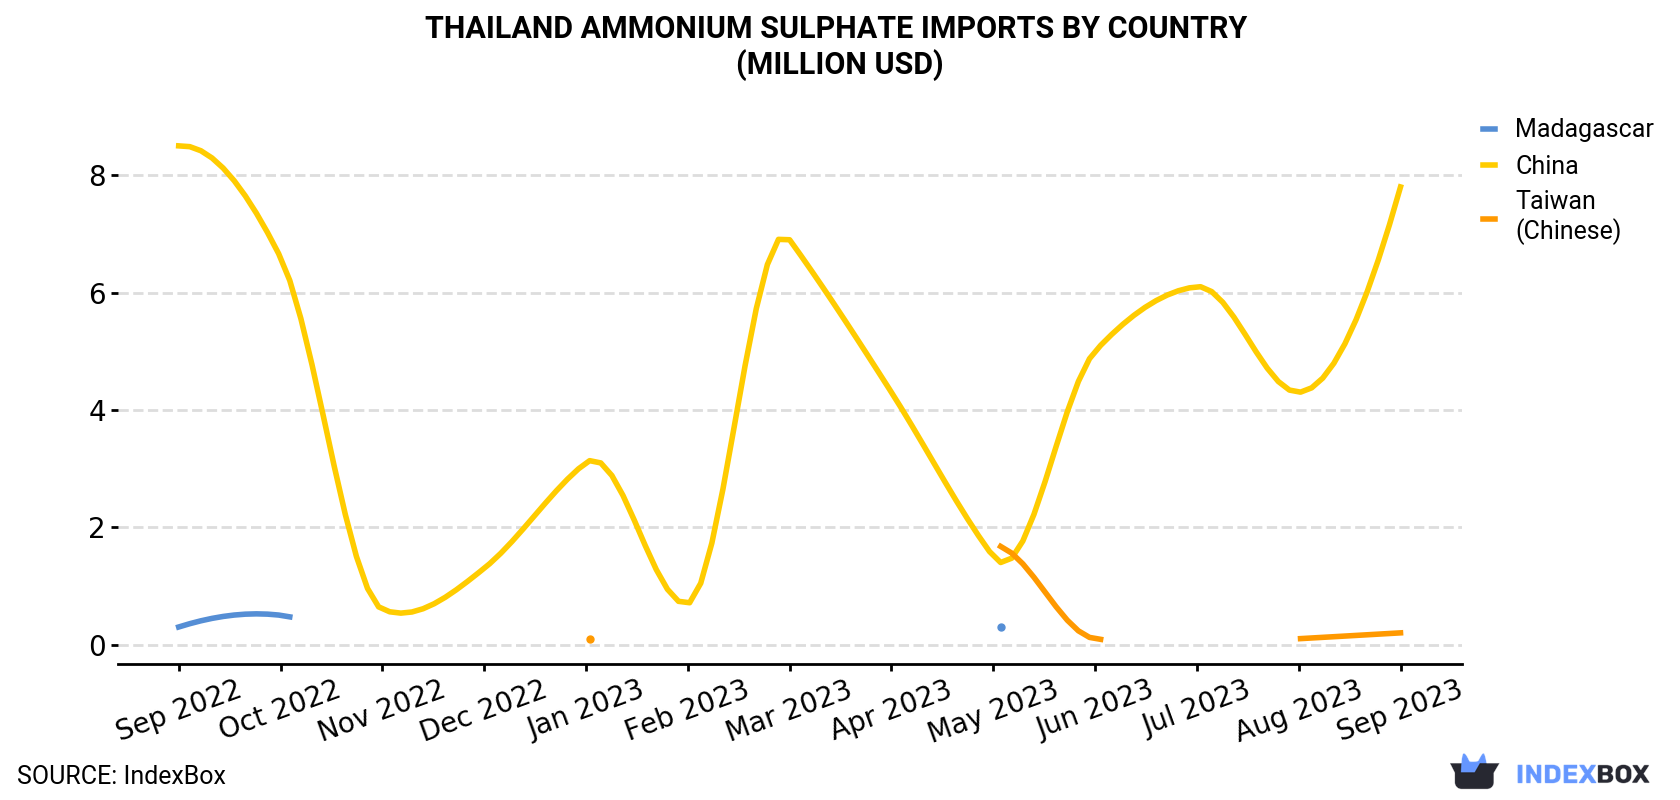 Thailand Ammonium Sulphate Imports By Country (Million USD)